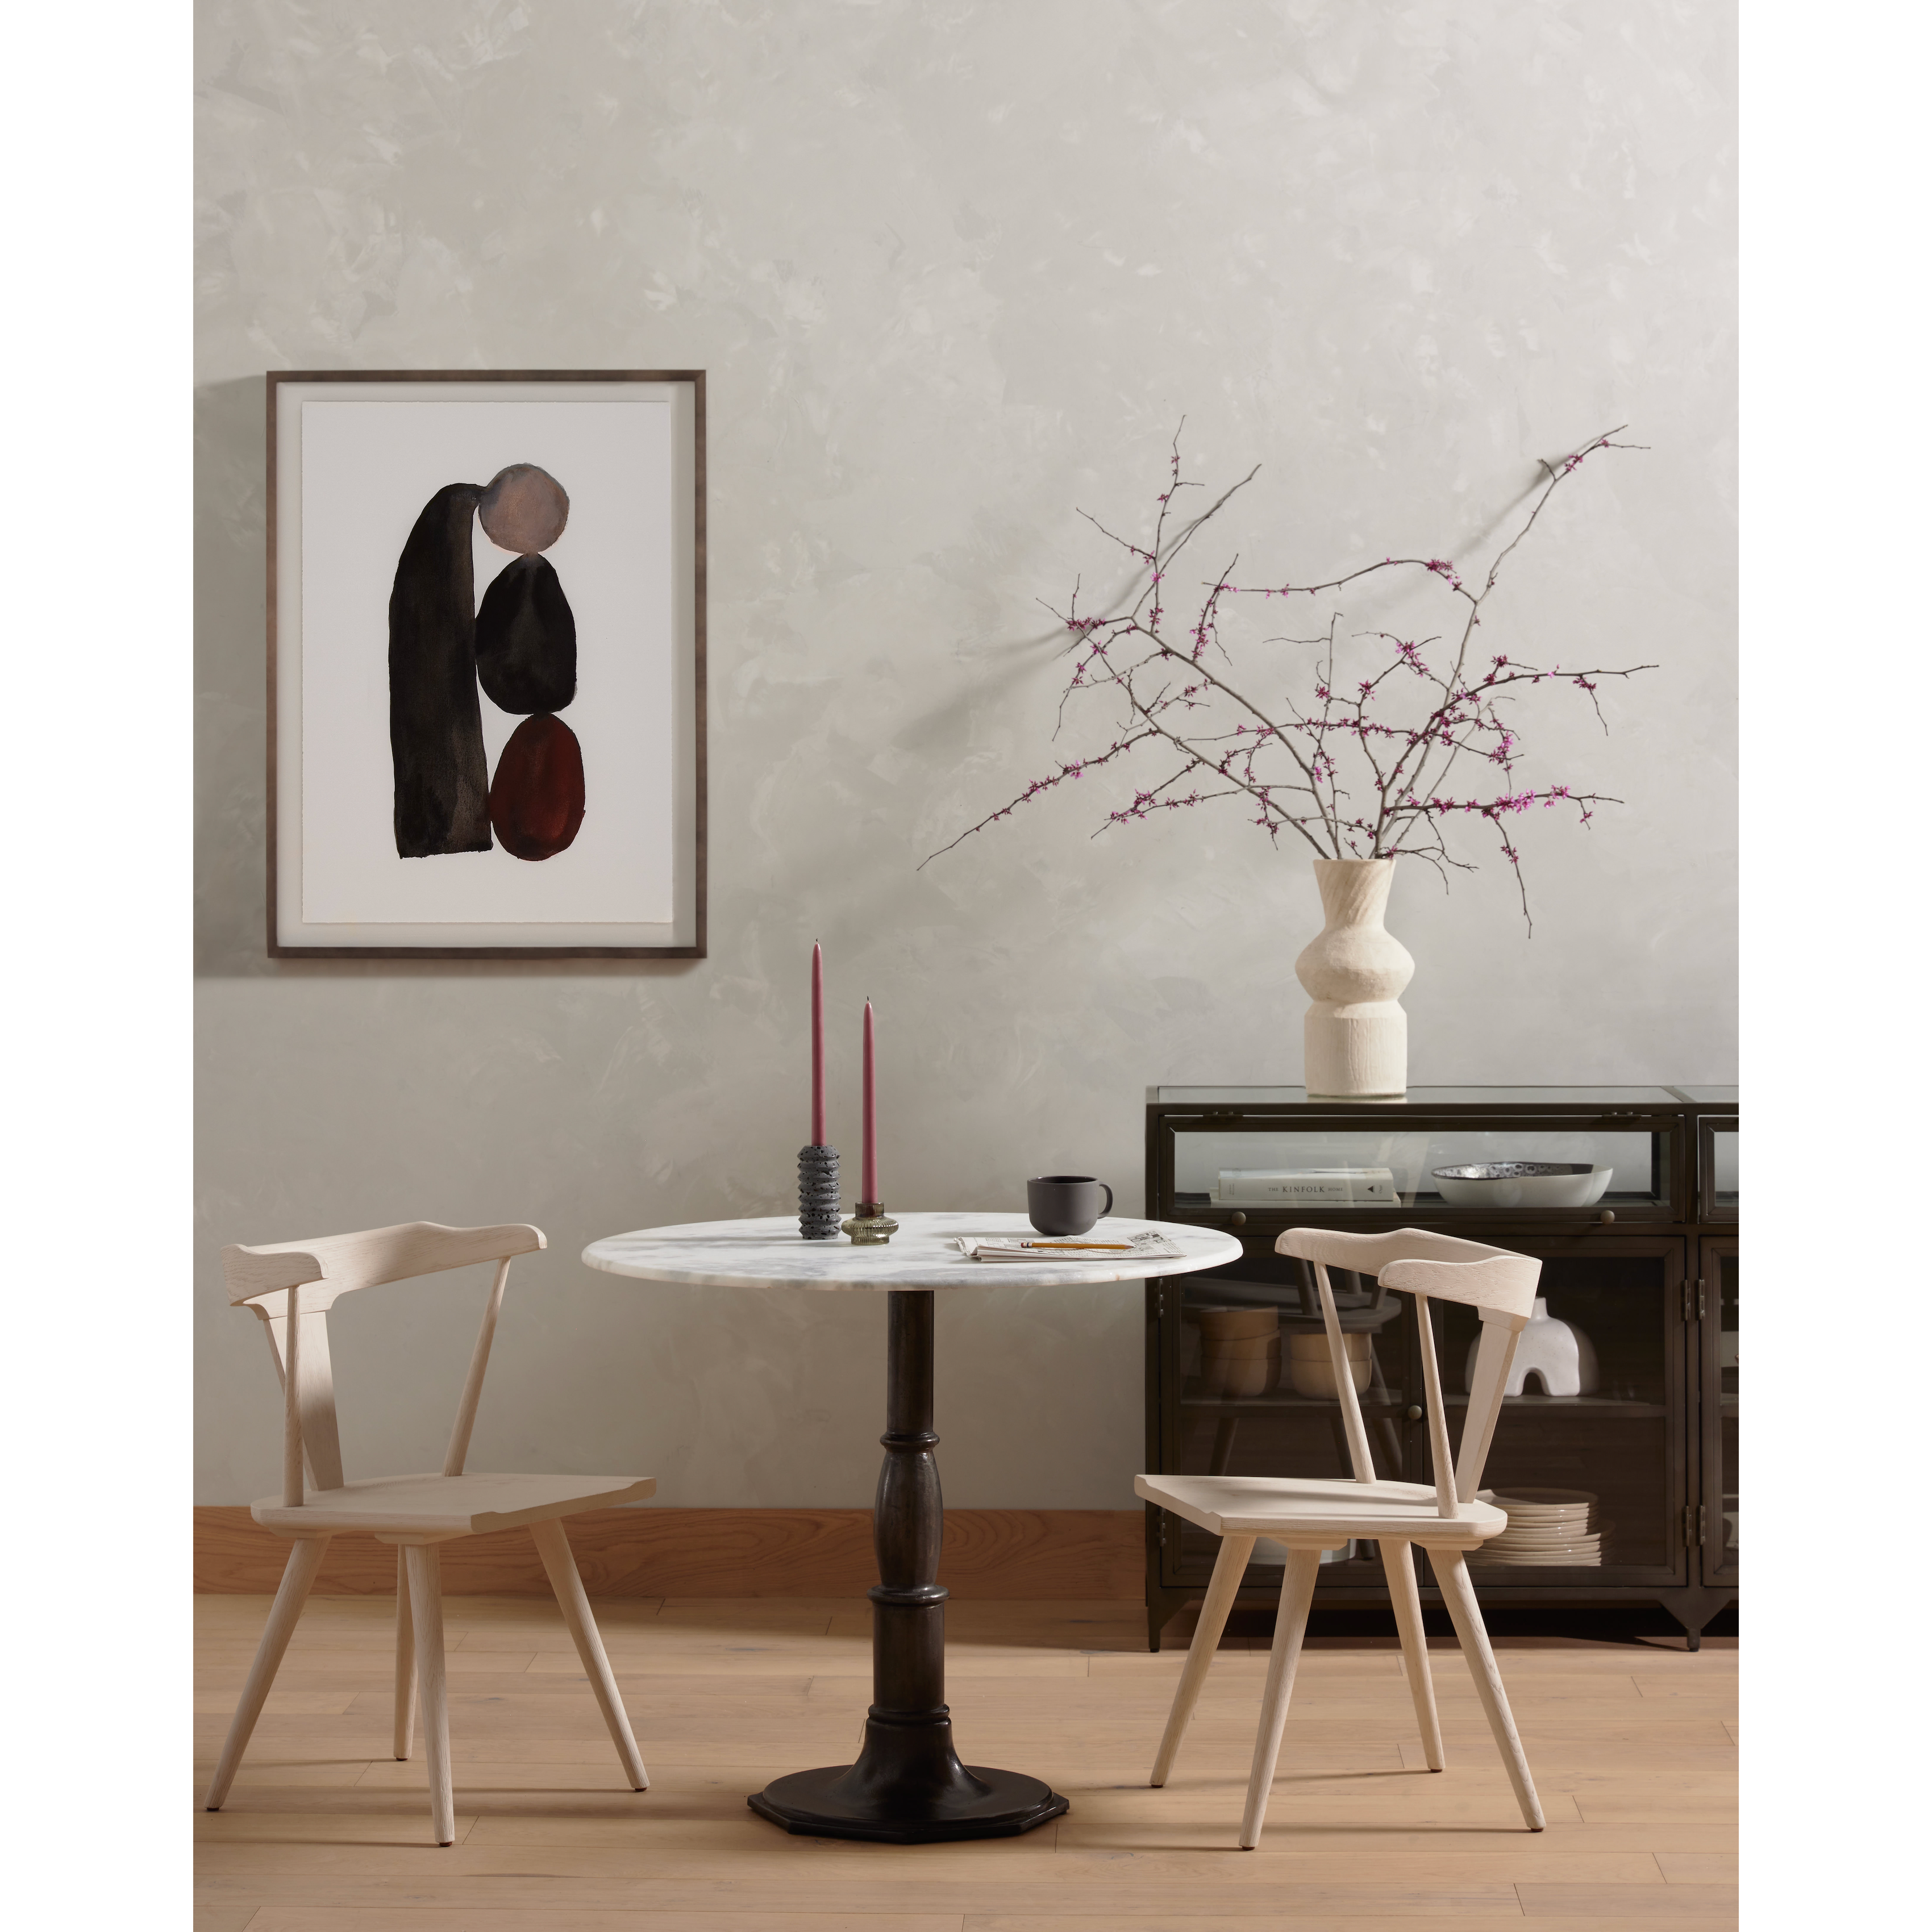 This new take on the mid-century Windsor chair, the Ripley Off White Dining Chair has a bowed, sculptural silhouette. The dining chair is done in an off-white finish to highlight the natural grain of weathered oak. Amethyst Home provides interior design, new construction, custom furniture, and rugs for the Des Moines metro area.